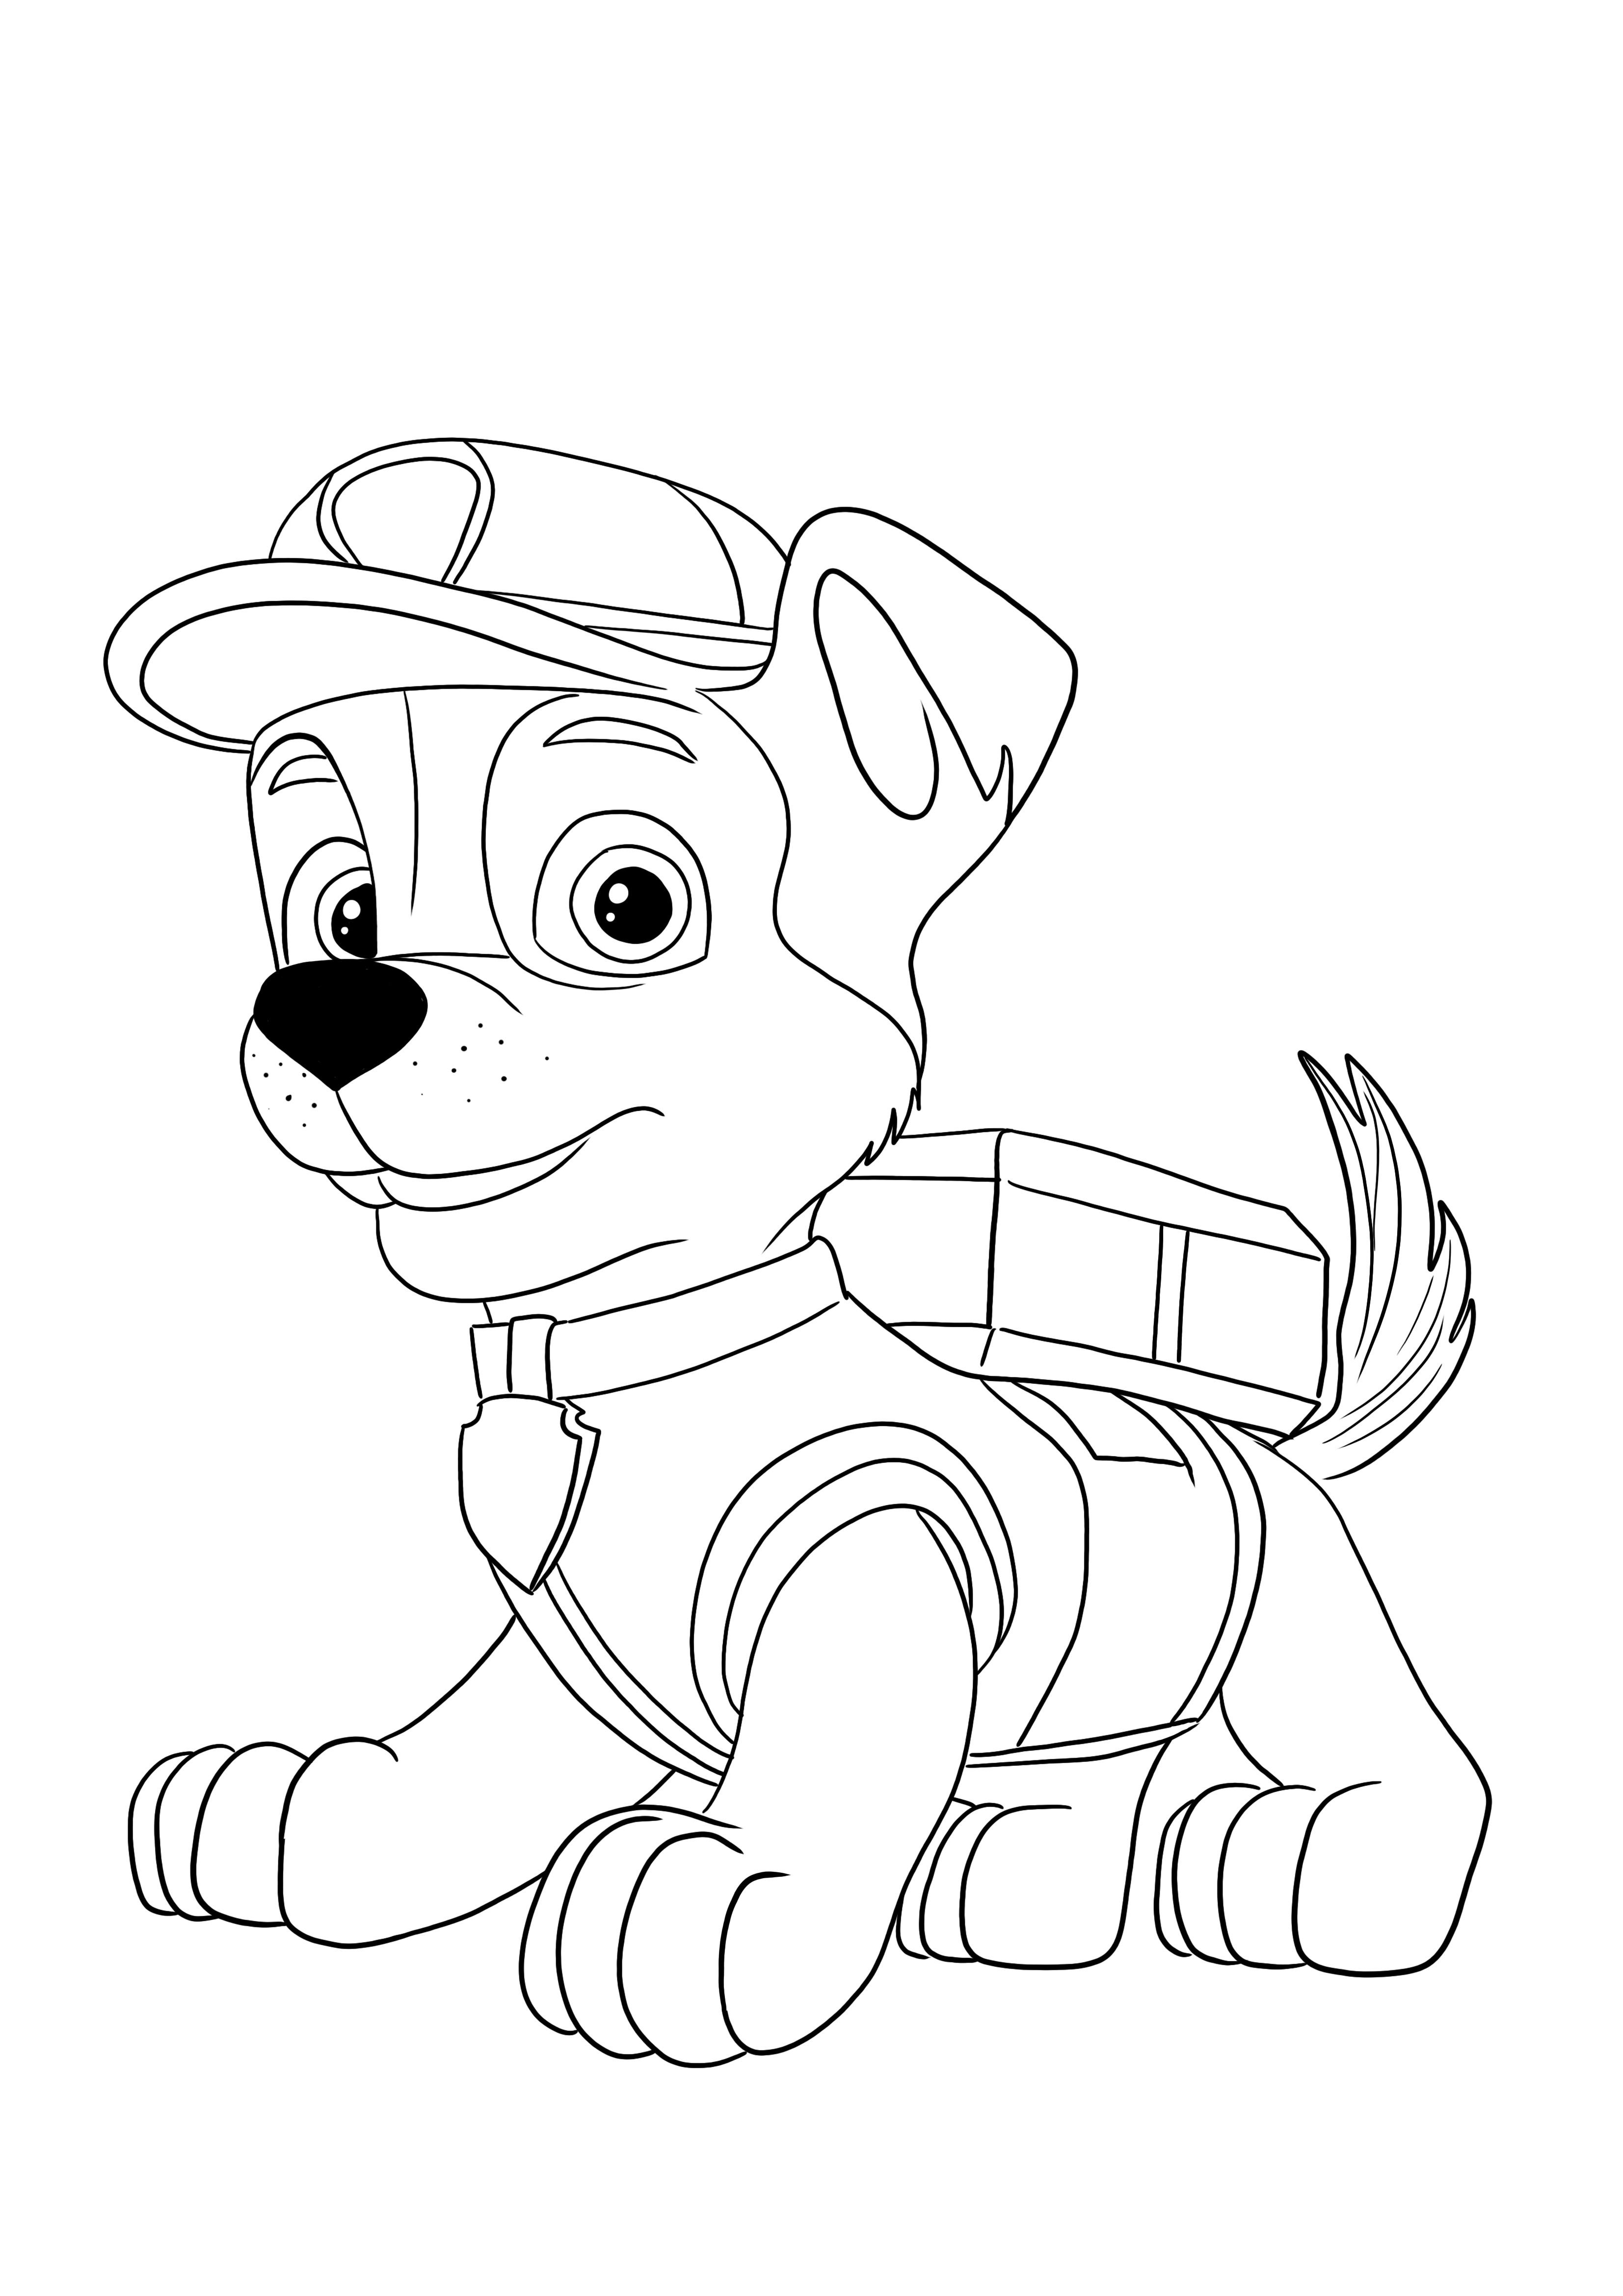 Rocky from Paw patrol image to print and color for free for kids